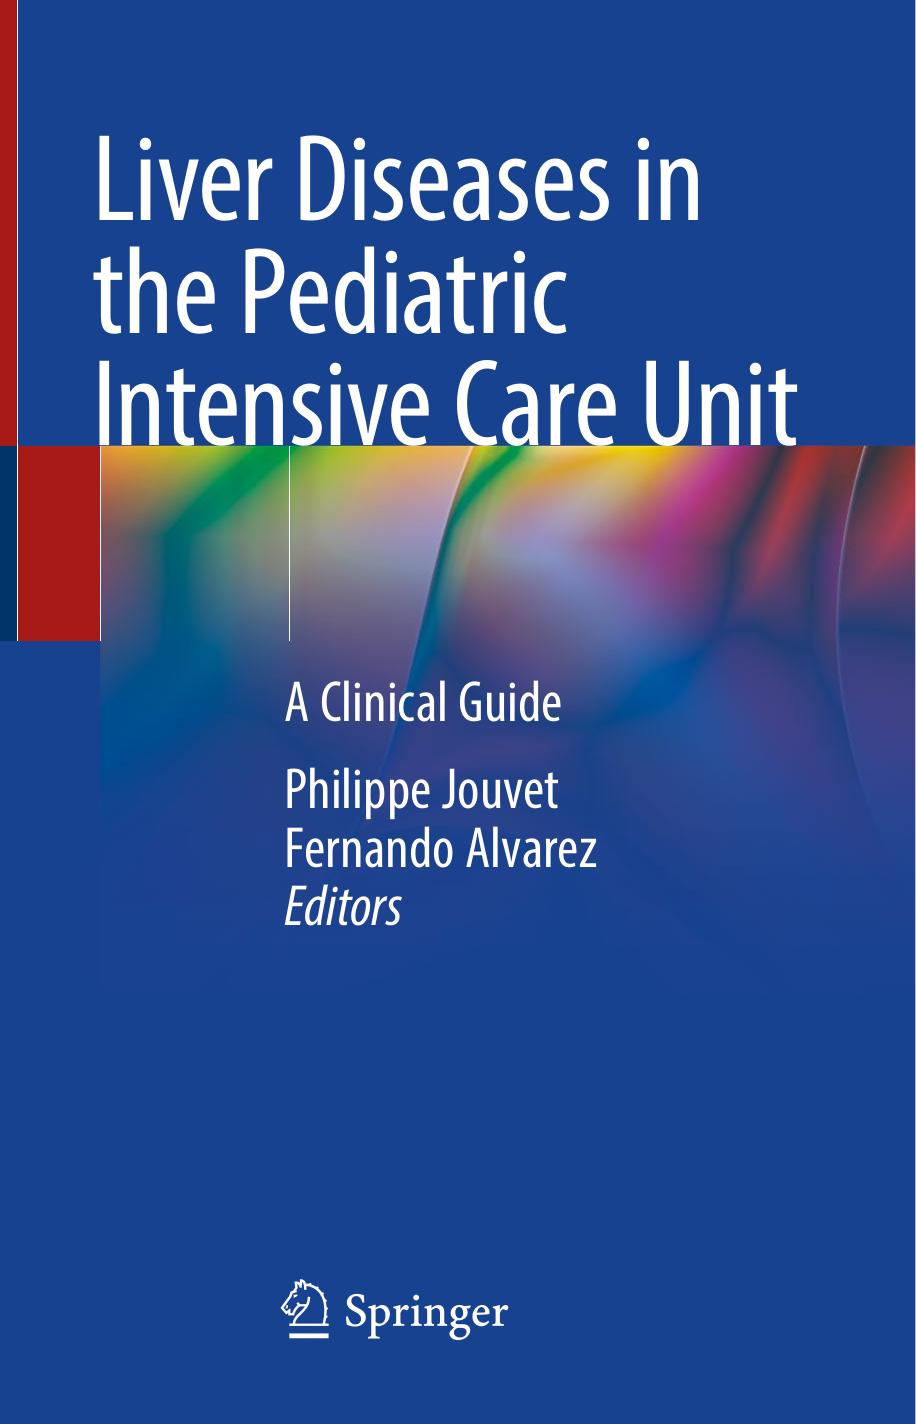 Liver Diseases in the Pediatric Intensive Care Unit  A Clinical Guide (2021)